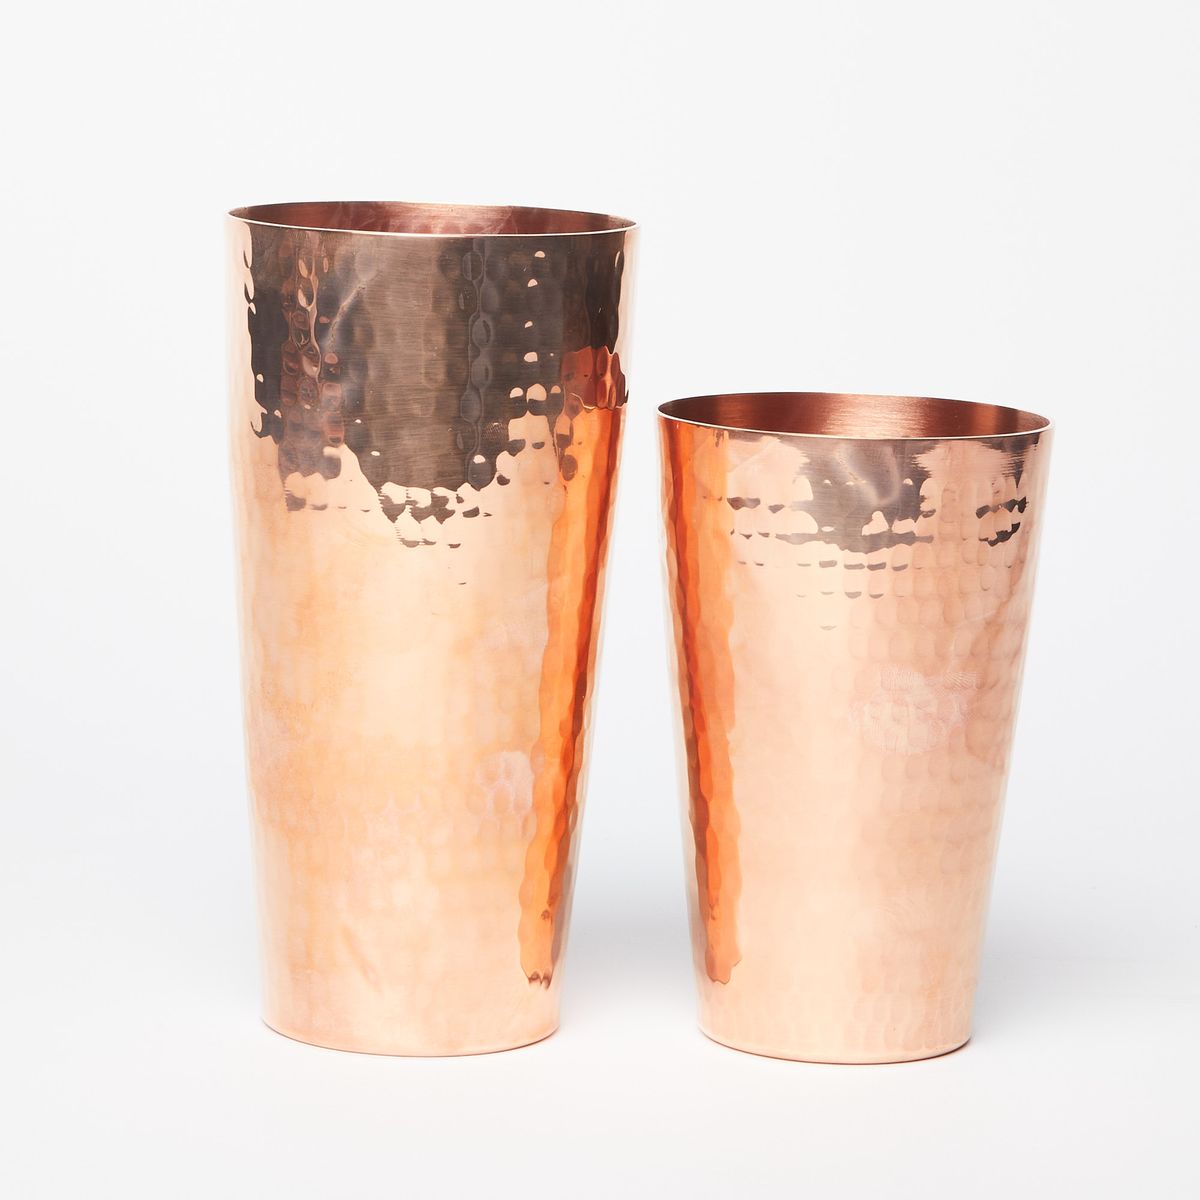 Two hammered copper cups, larger one of the left and smaller on the right